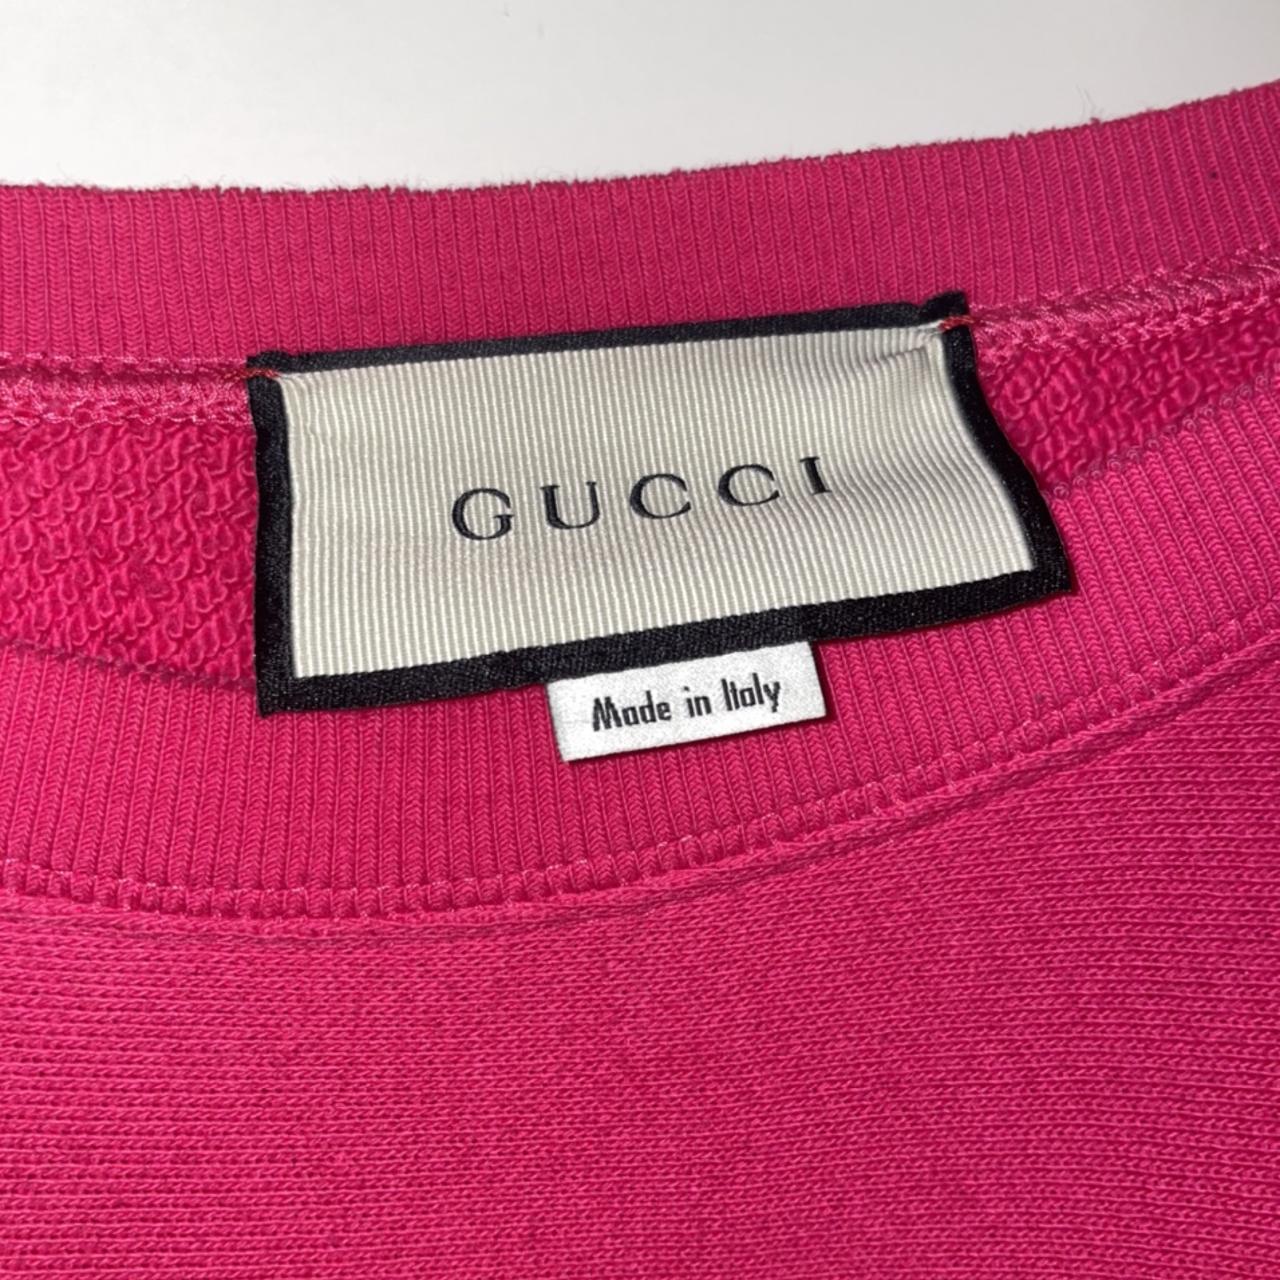 Gucci pink jumper. Great condition. Worn once or... - Depop